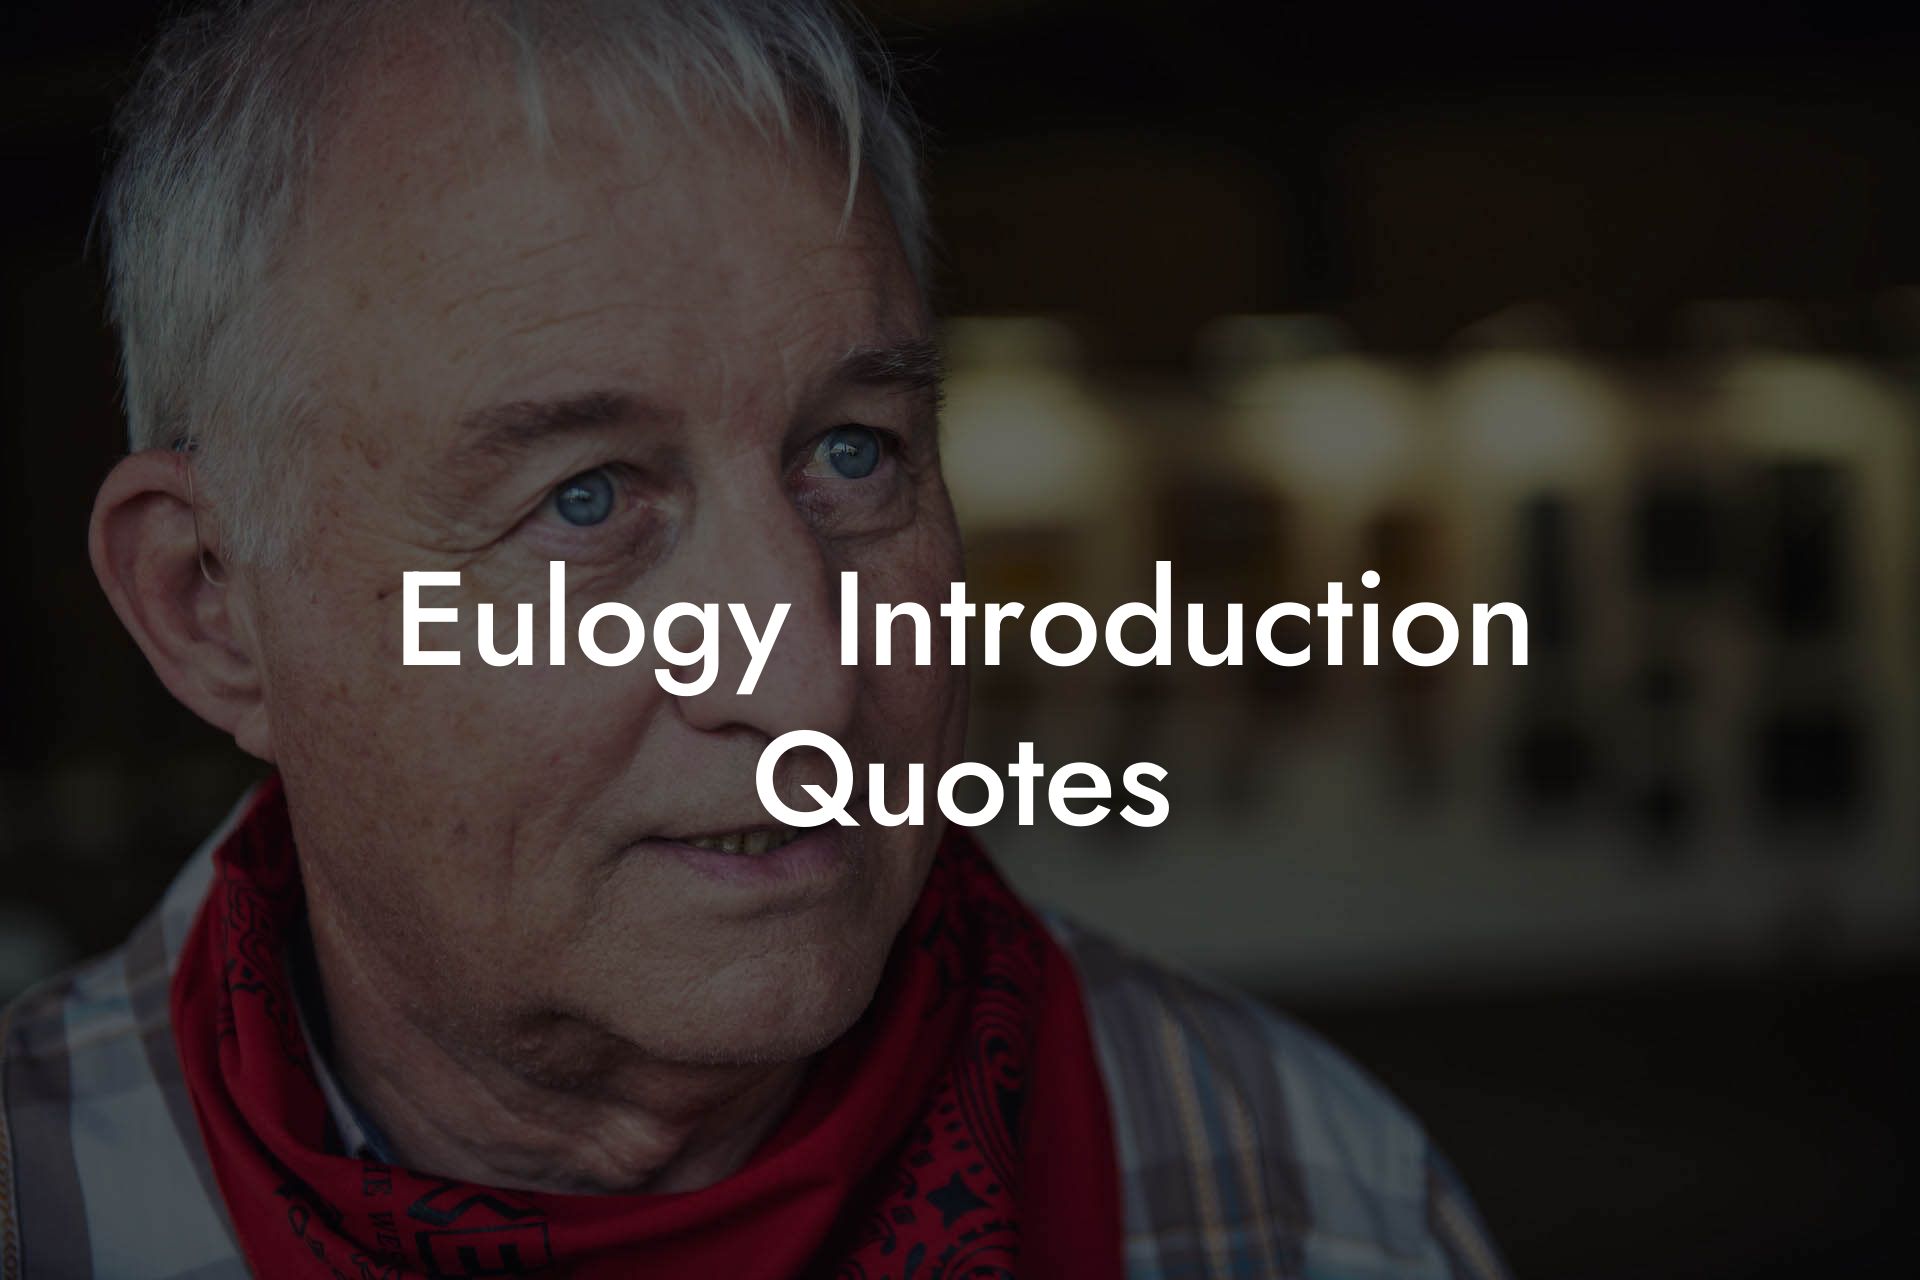 Eulogy Introduction Quotes